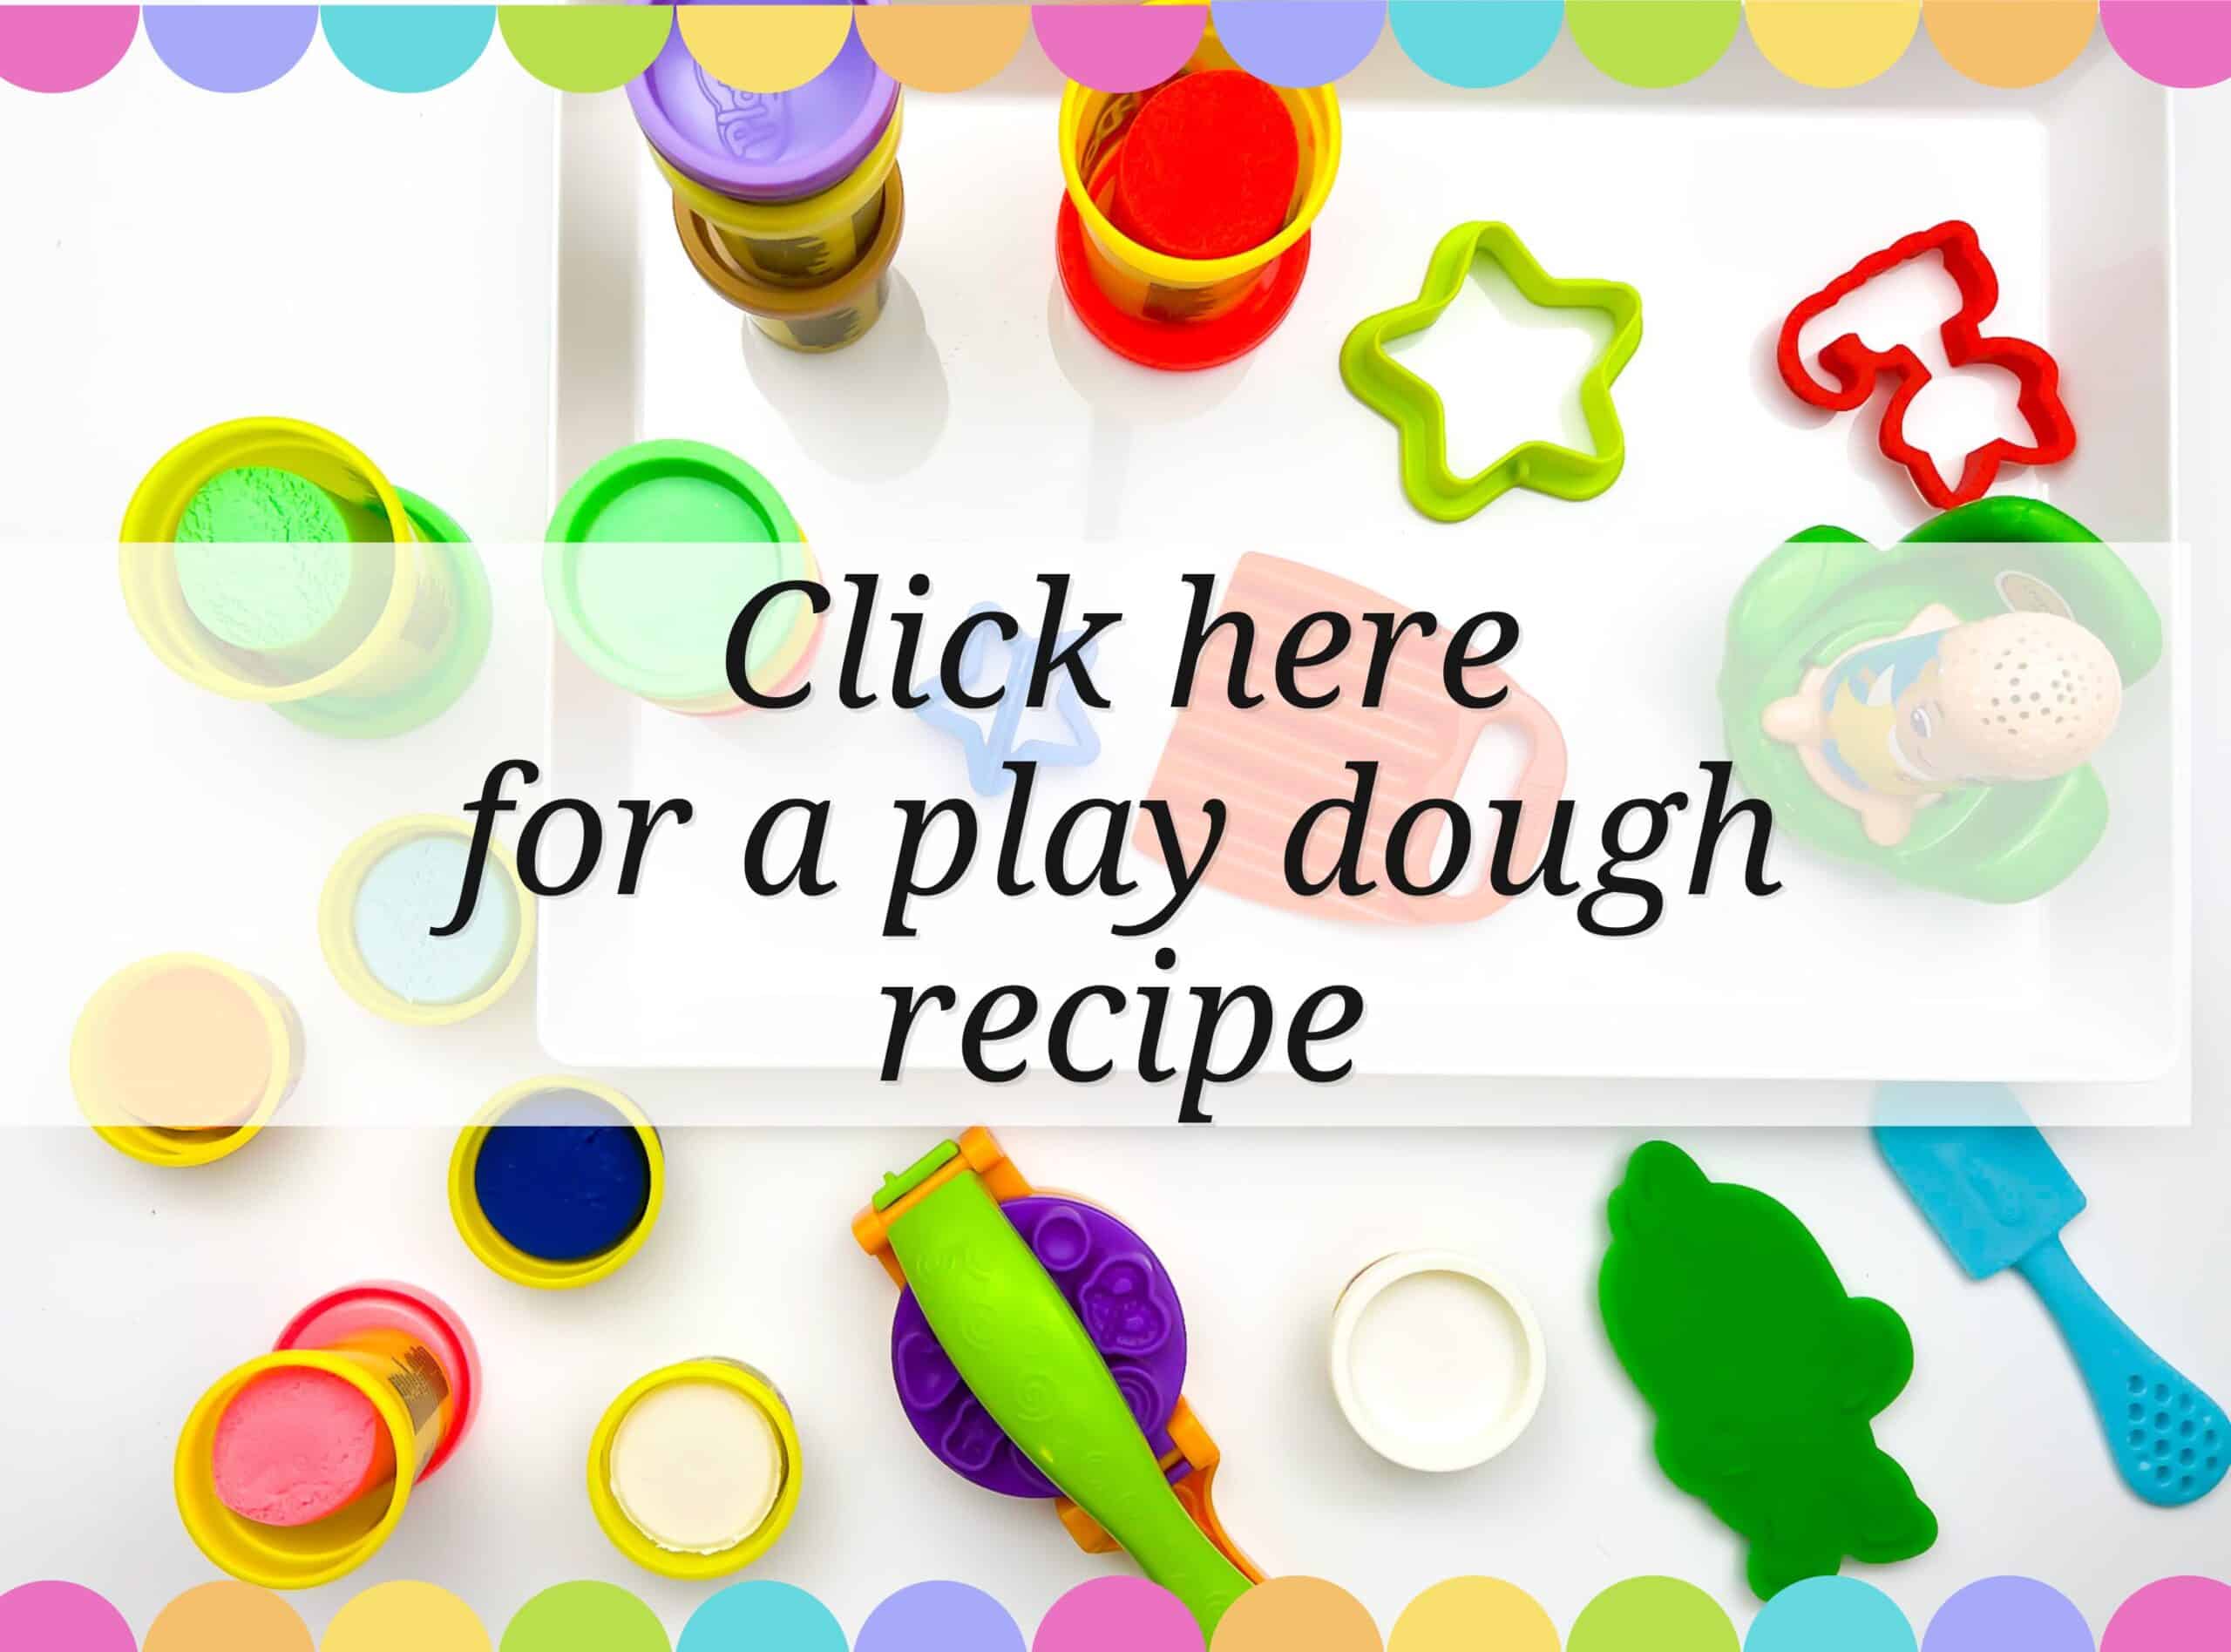 Text overlay "click here for a play dough recipe" on top of a picture of play dough cans and tools